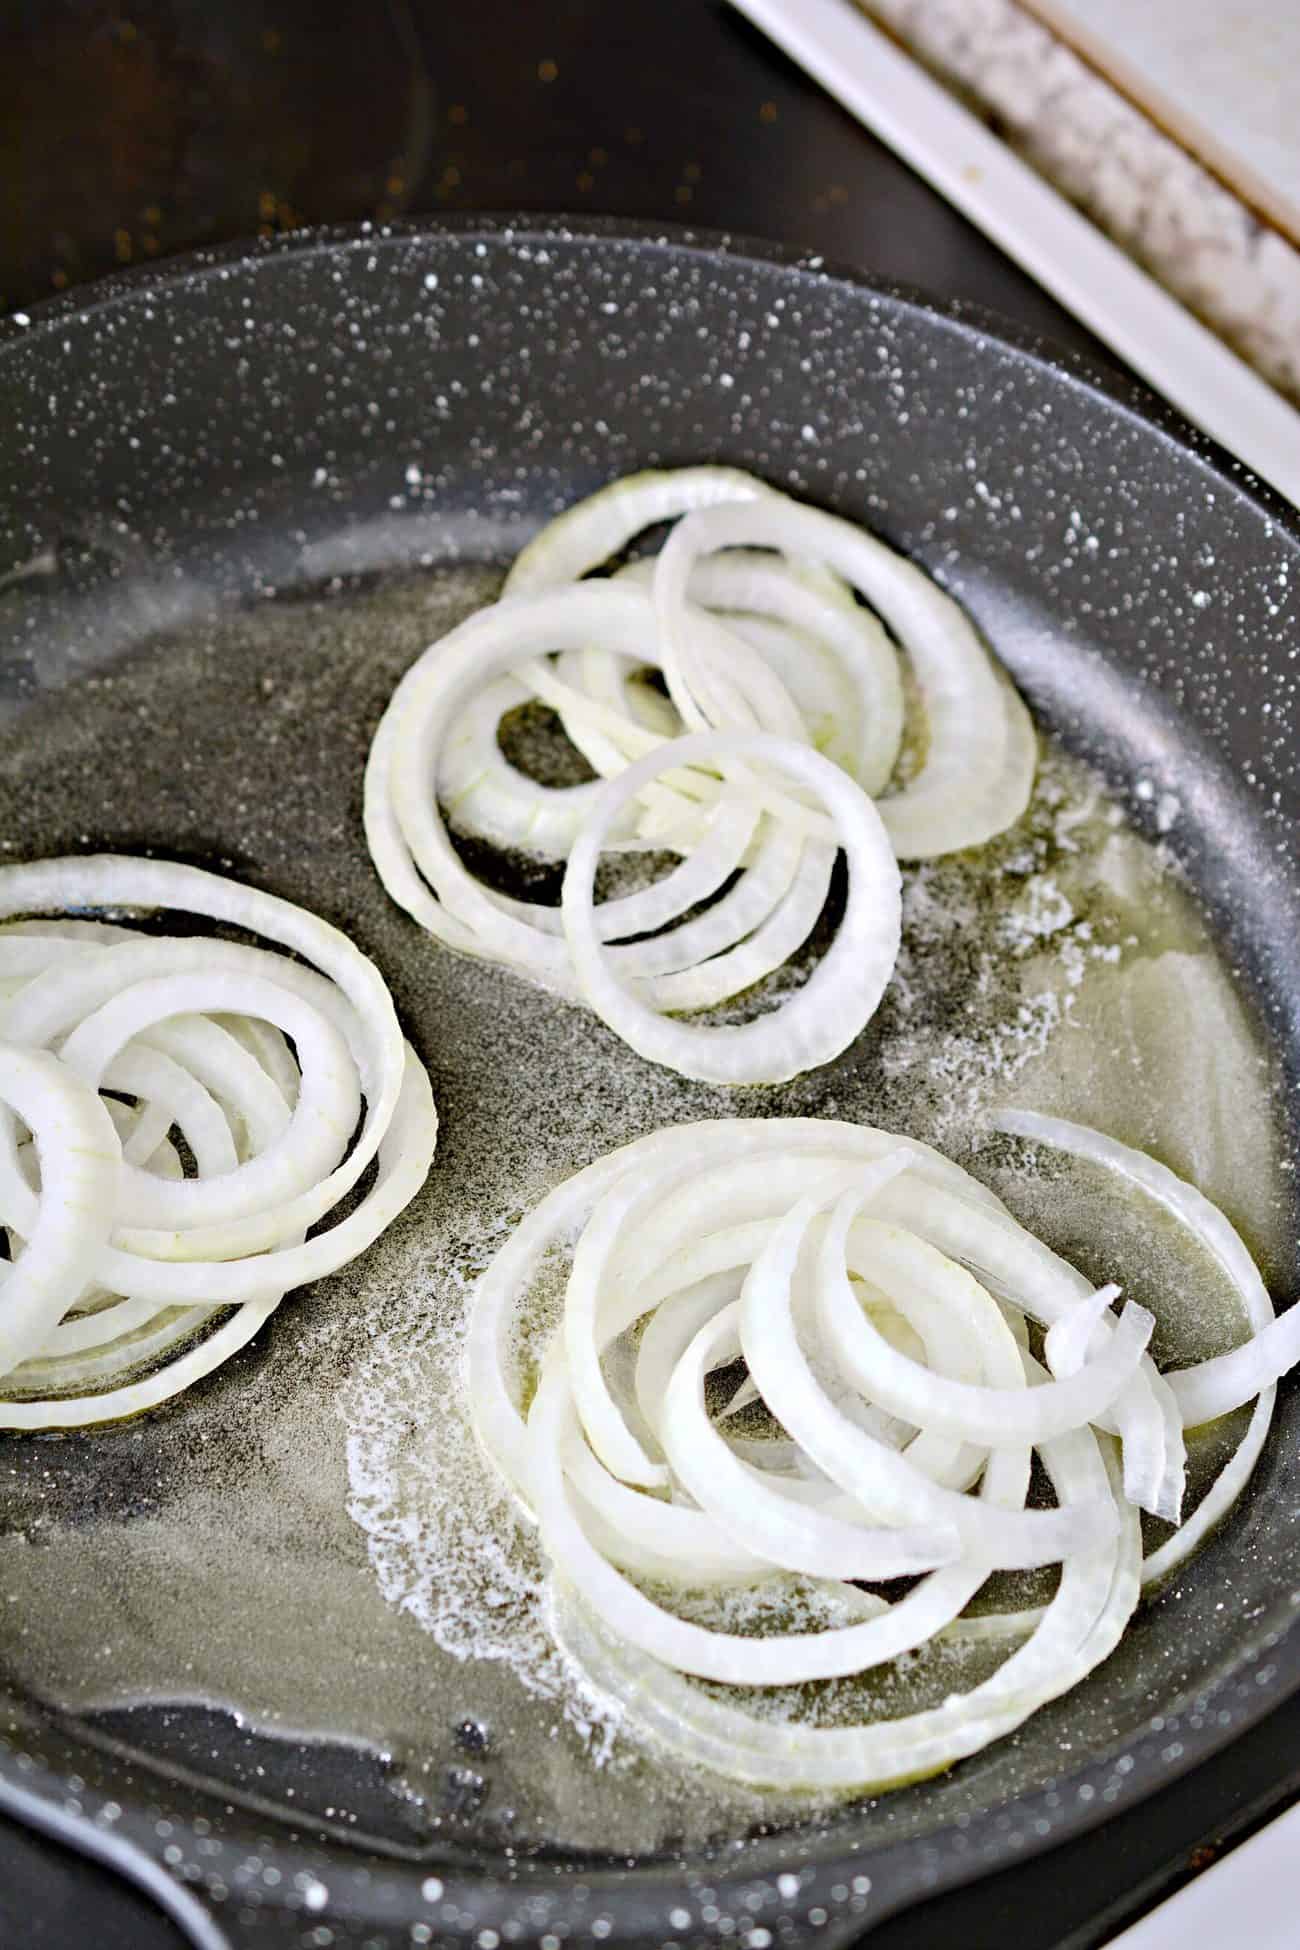 Add 2 tbsp of butter to a skillet over medium heat and place 5 piles of sliced onion into the skillet.